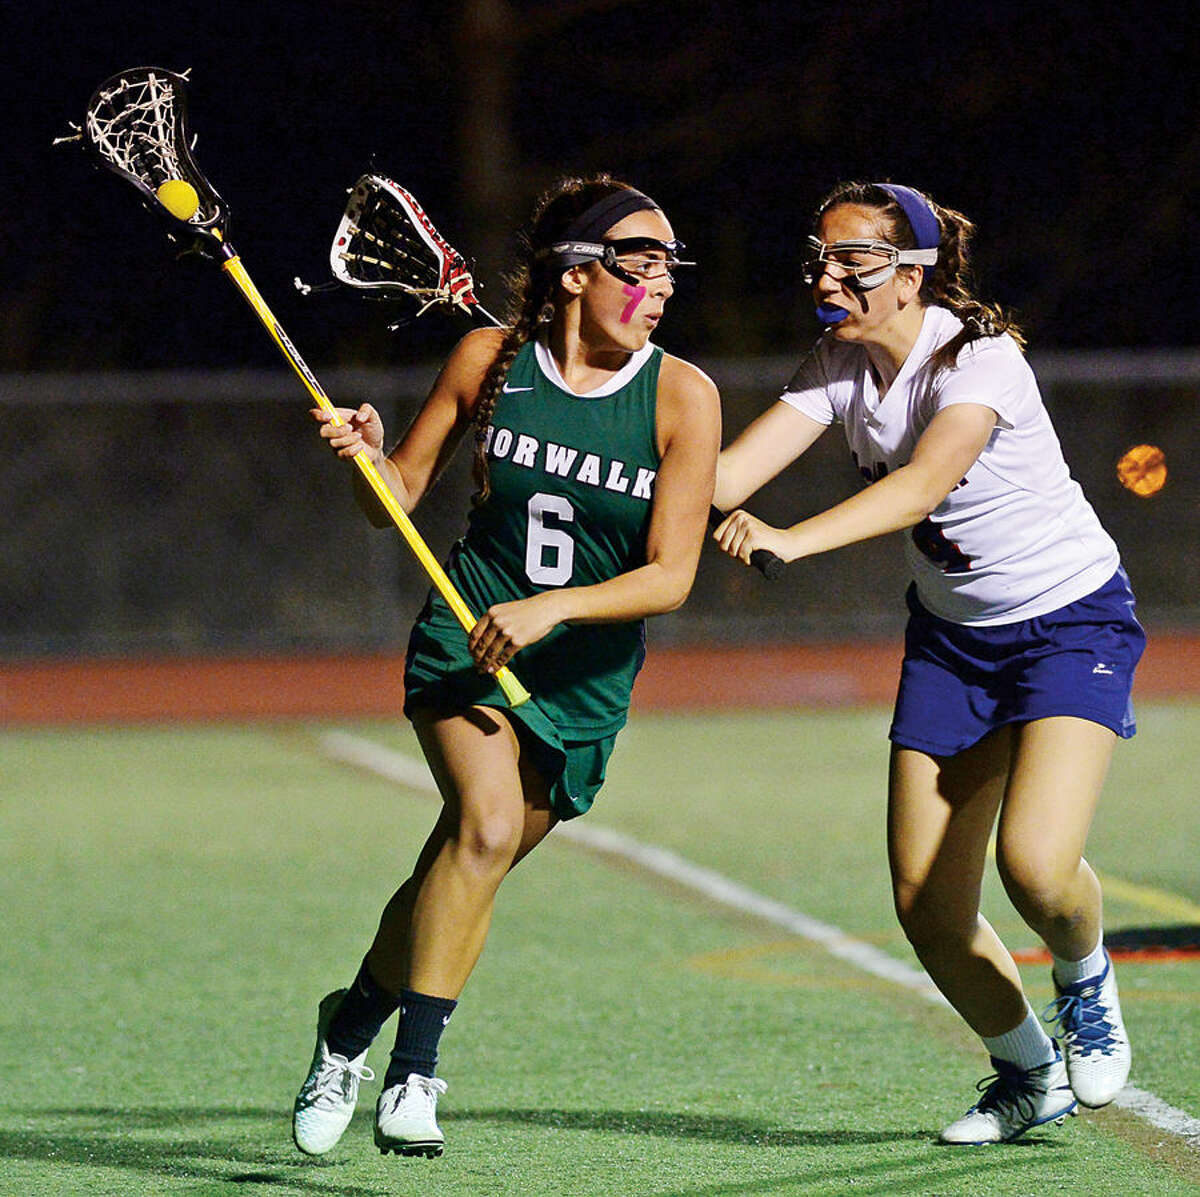 Hour photo / Erik Trautmann The Norwalk High School girls lacrosse team squares off against Brien McMahon High School in their inta-city game for the second annual Kuchta Cup.